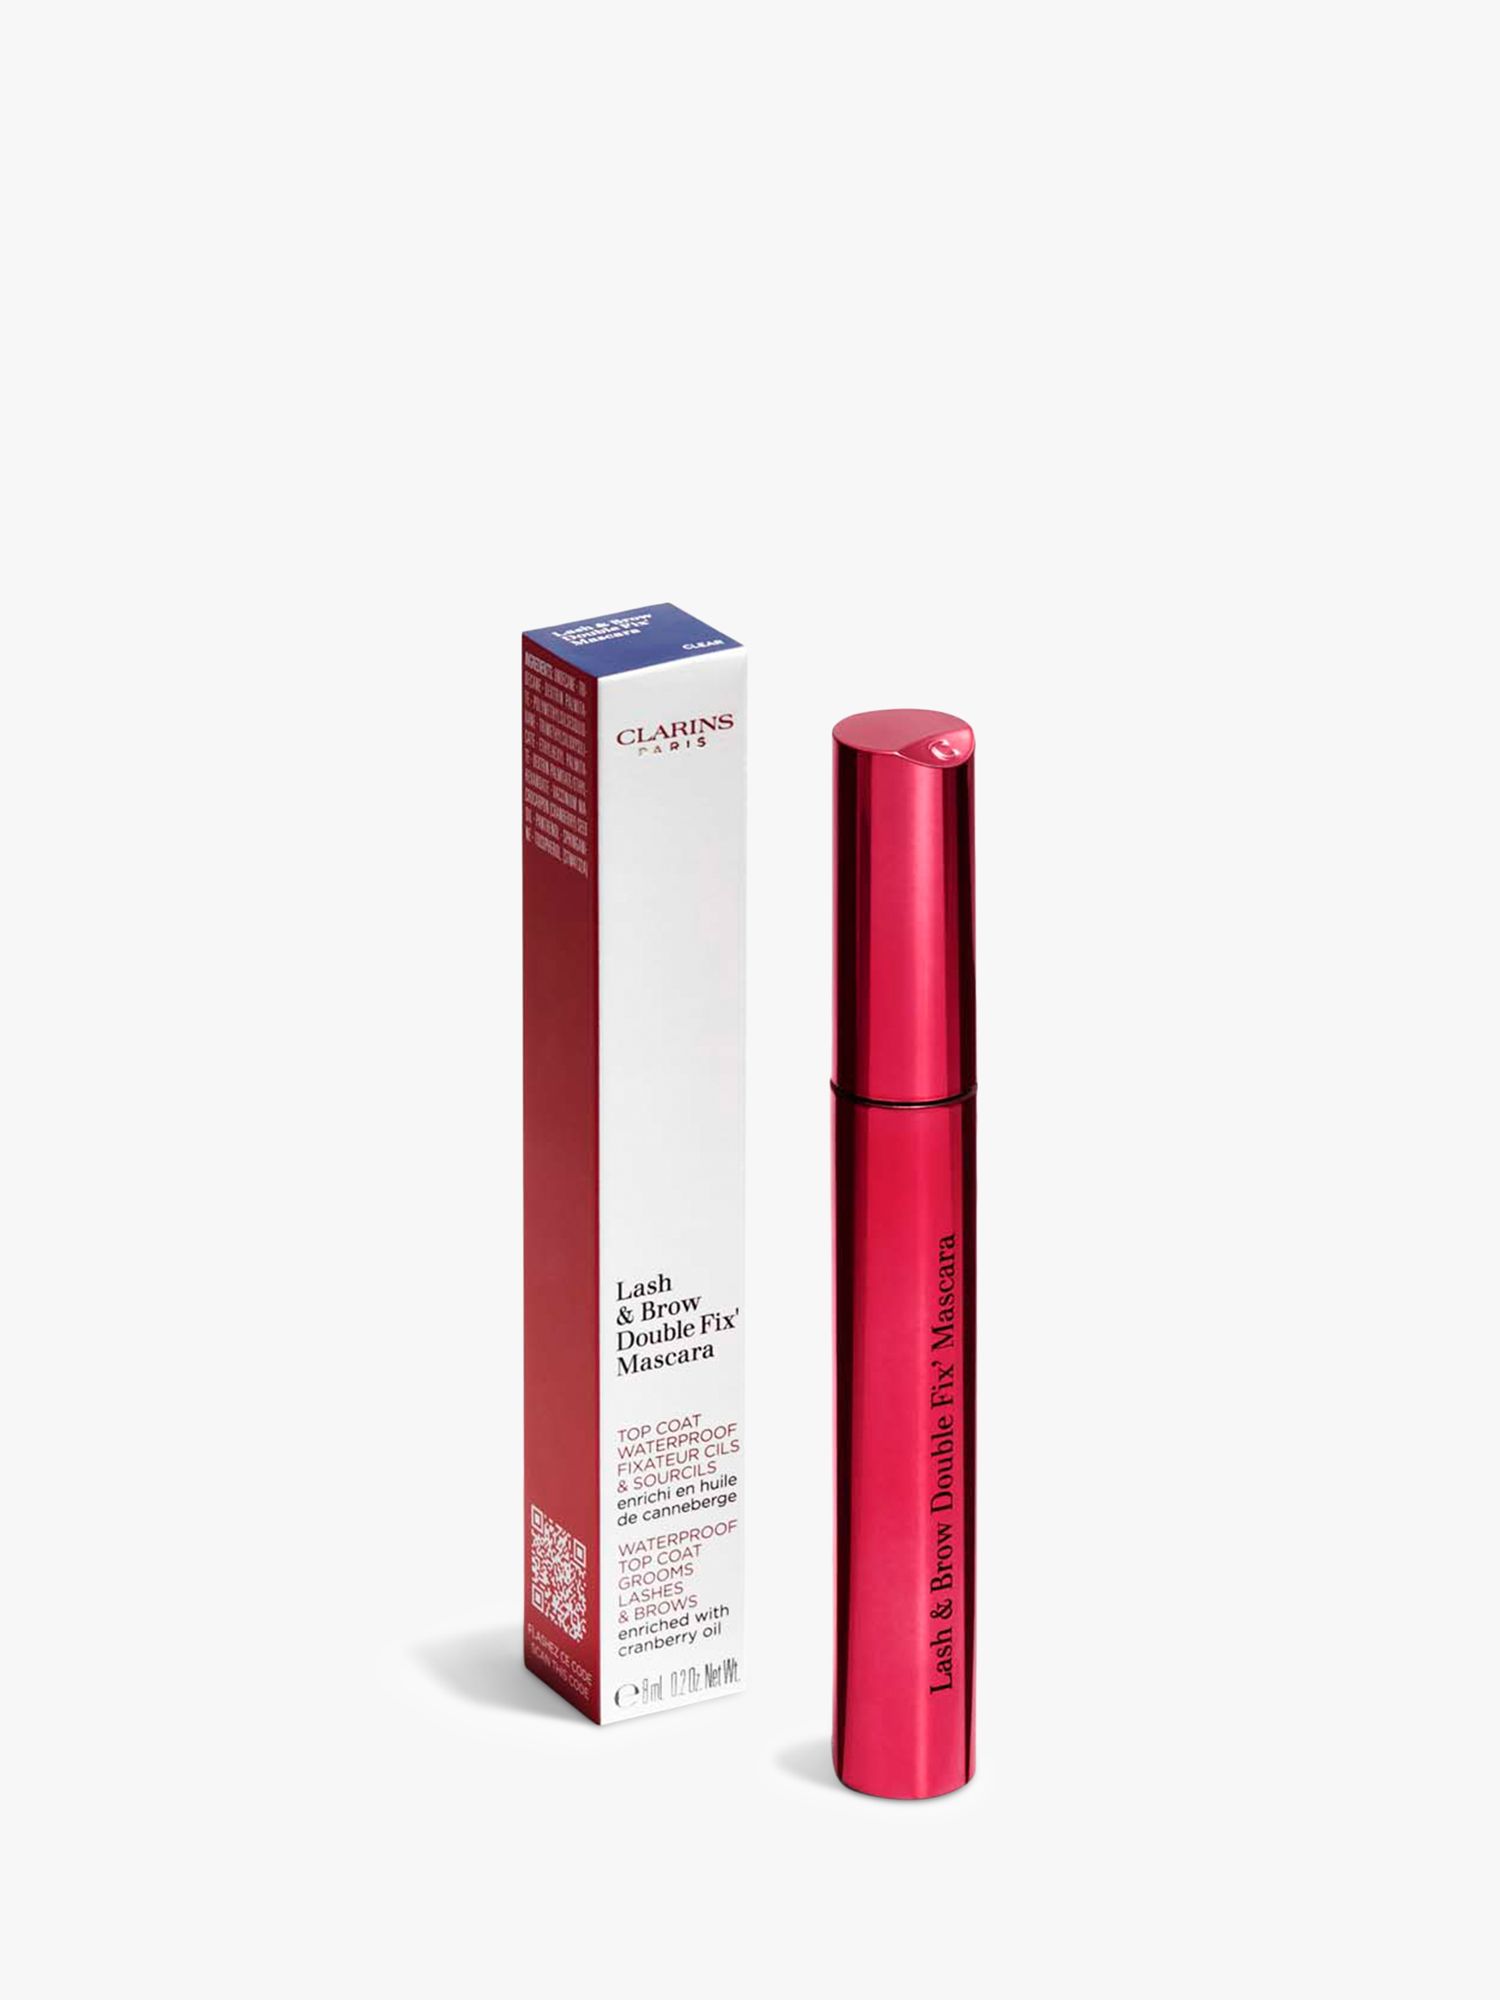 Clarins Lash & Brow Double Fix Mascara, 01 Clear 5